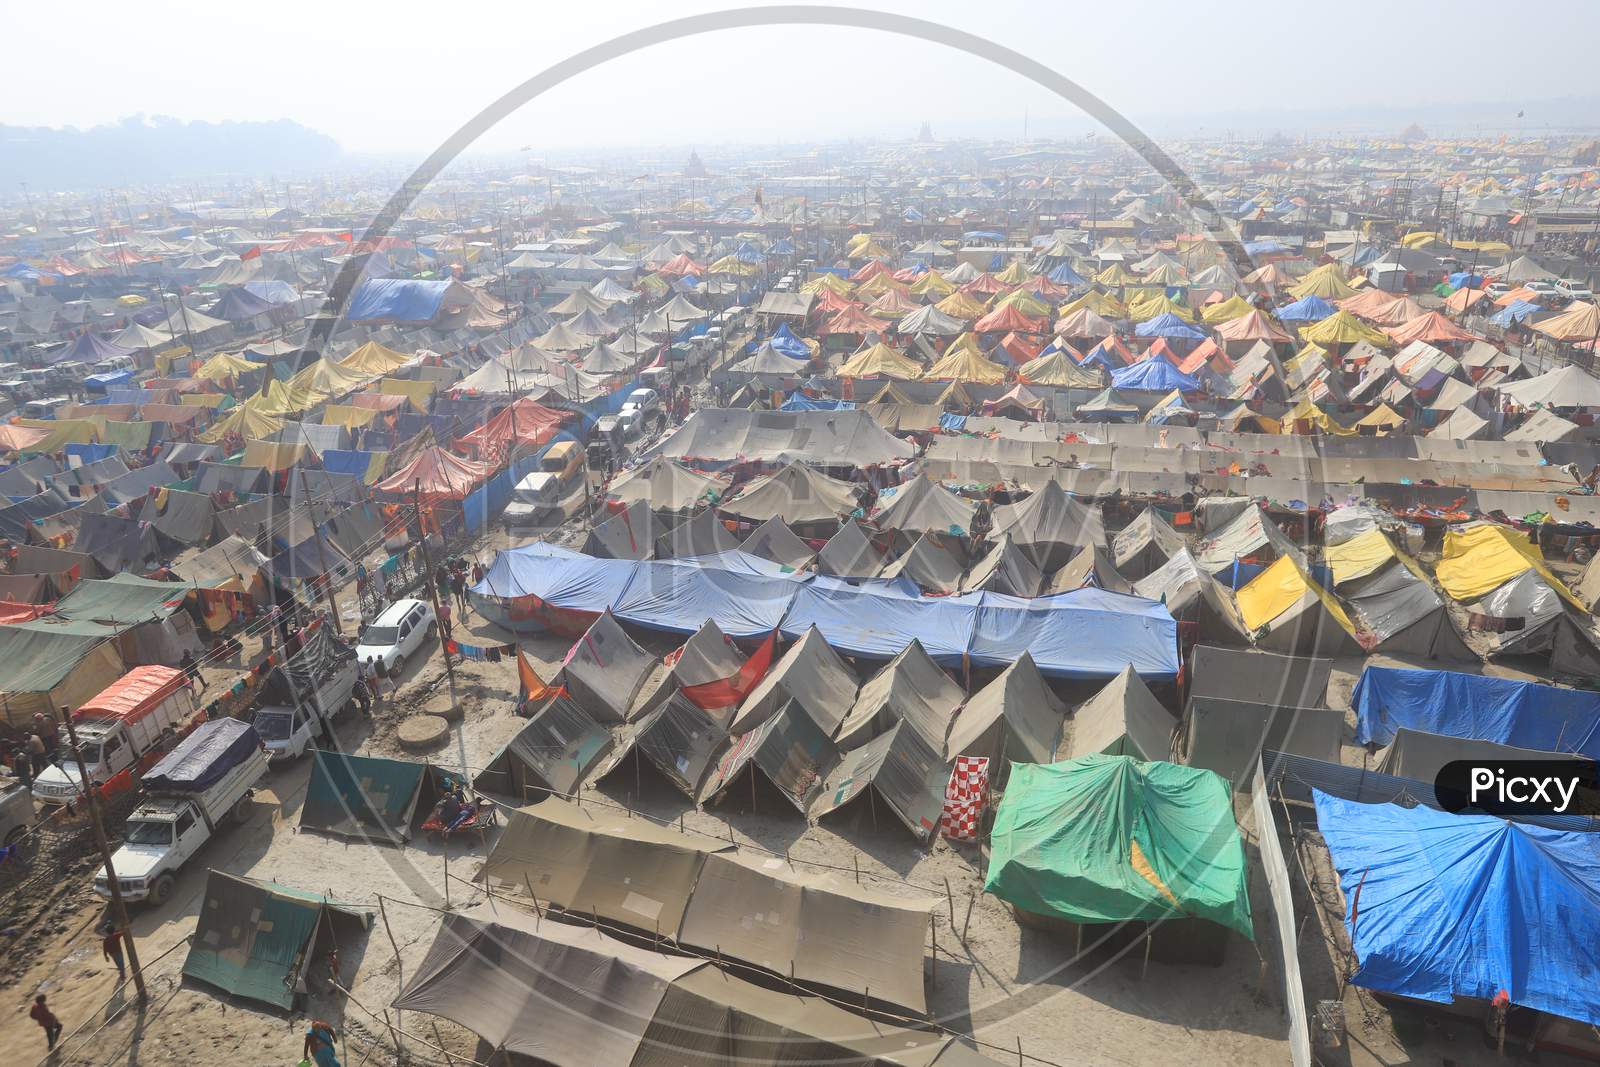 Shelters or Tents Arranged in Prayagraj During Magh Mela